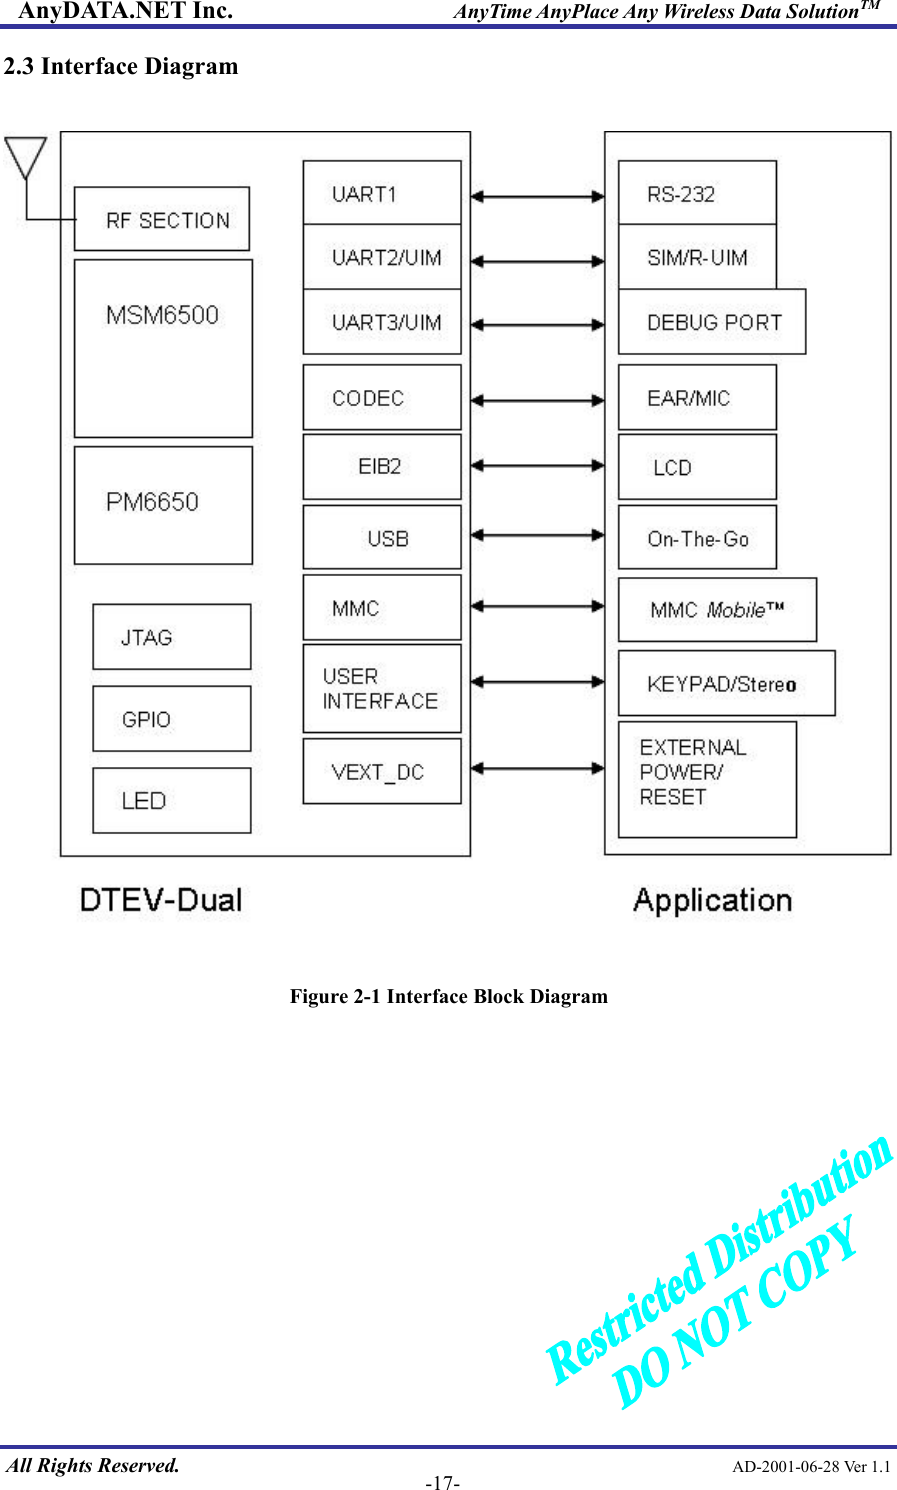 AnyDATA.NET Inc.                     AnyTime AnyPlace Any Wireless Data SolutionTM 2.3 Interface Diagram    Figure 2-1 Interface Block Diagram              All Rights Reserved.                                                AD-2001-06-28 Ver 1.1  -17-   